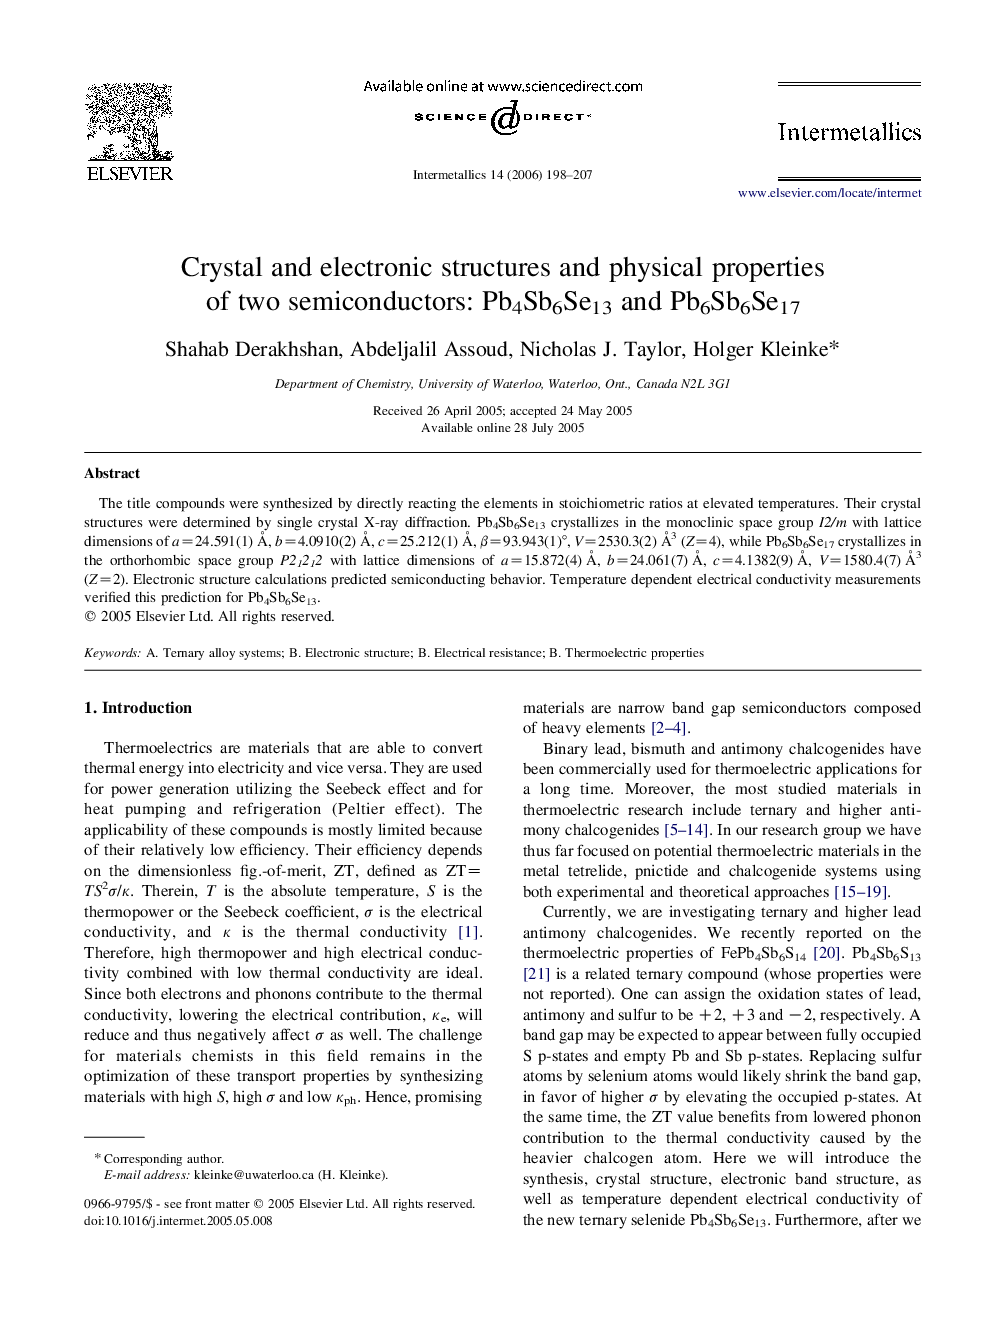 Crystal and electronic structures and physical properties of two semiconductors: Pb4Sb6Se13 and Pb6Sb6Se17